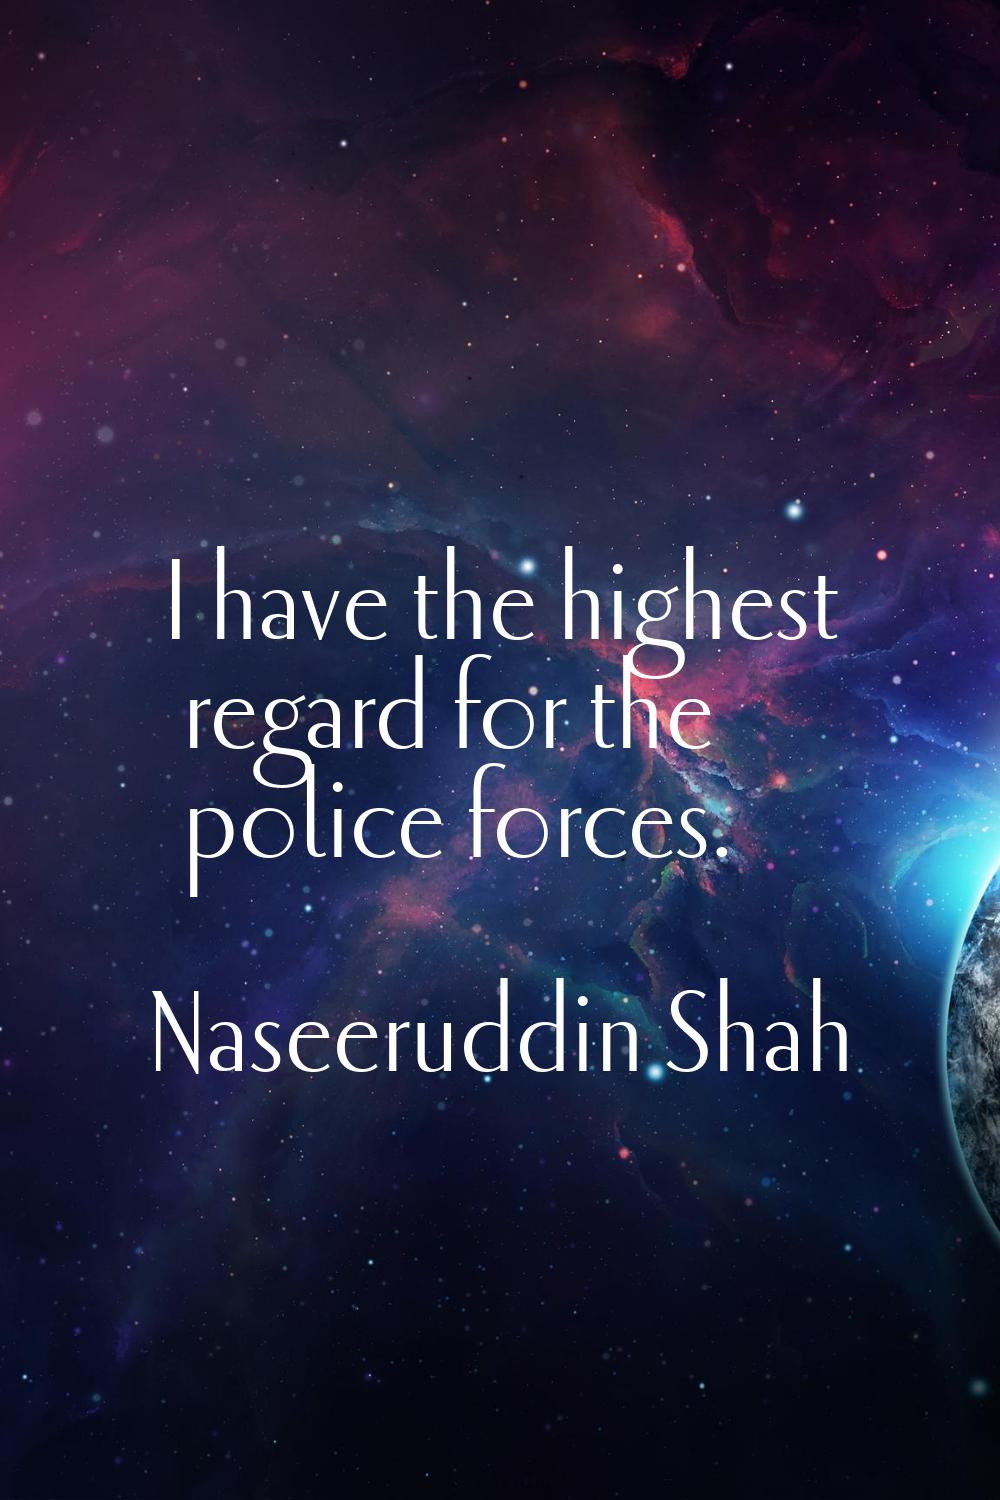 I have the highest regard for the police forces.